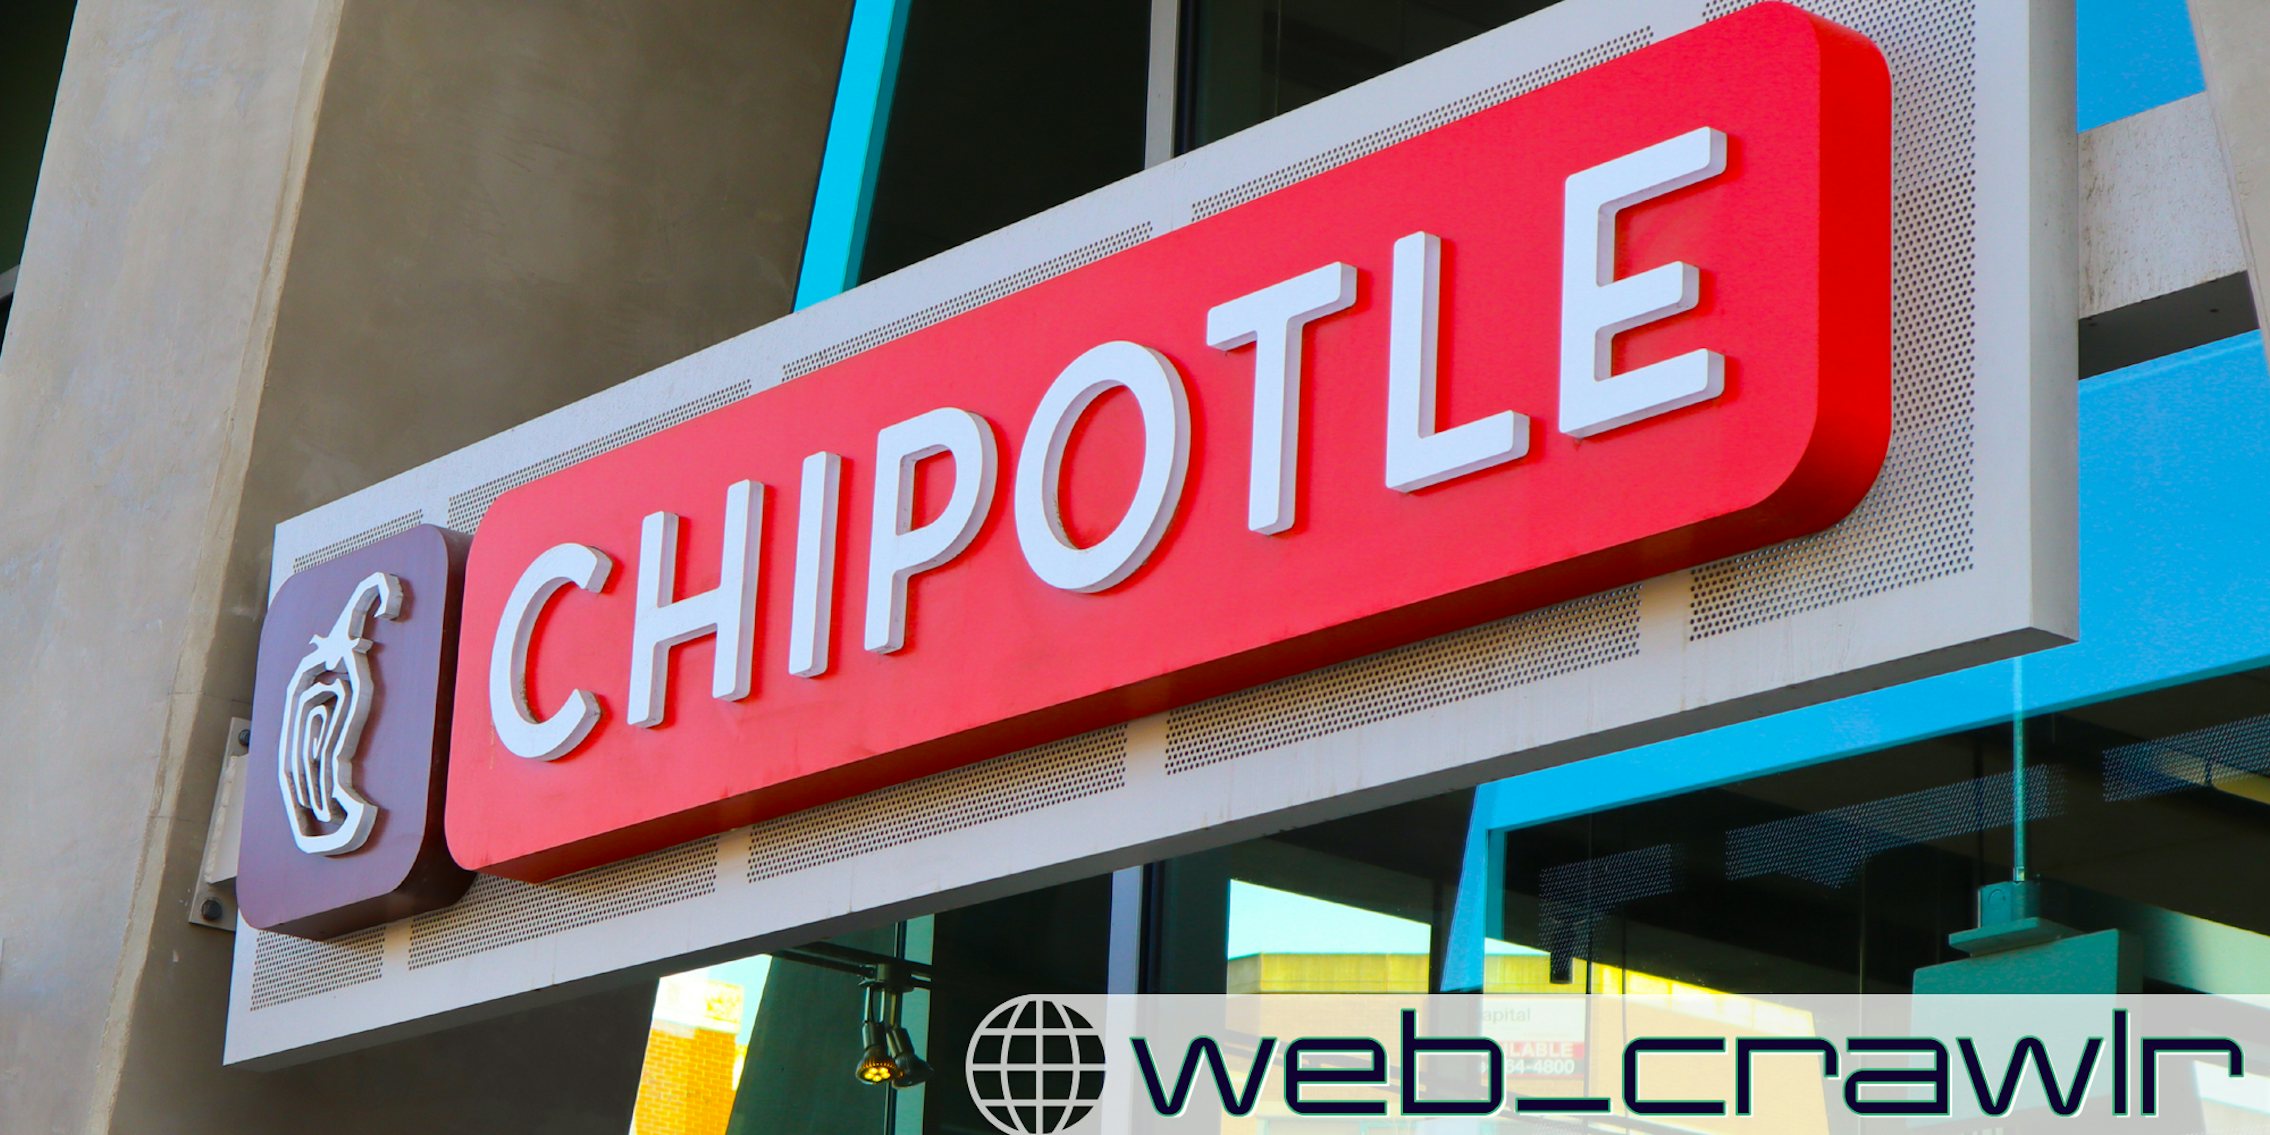 A Chipotle sign on the side of a building. The Daily Dot newsletter web_crawlr logo is in the bottom right corner.